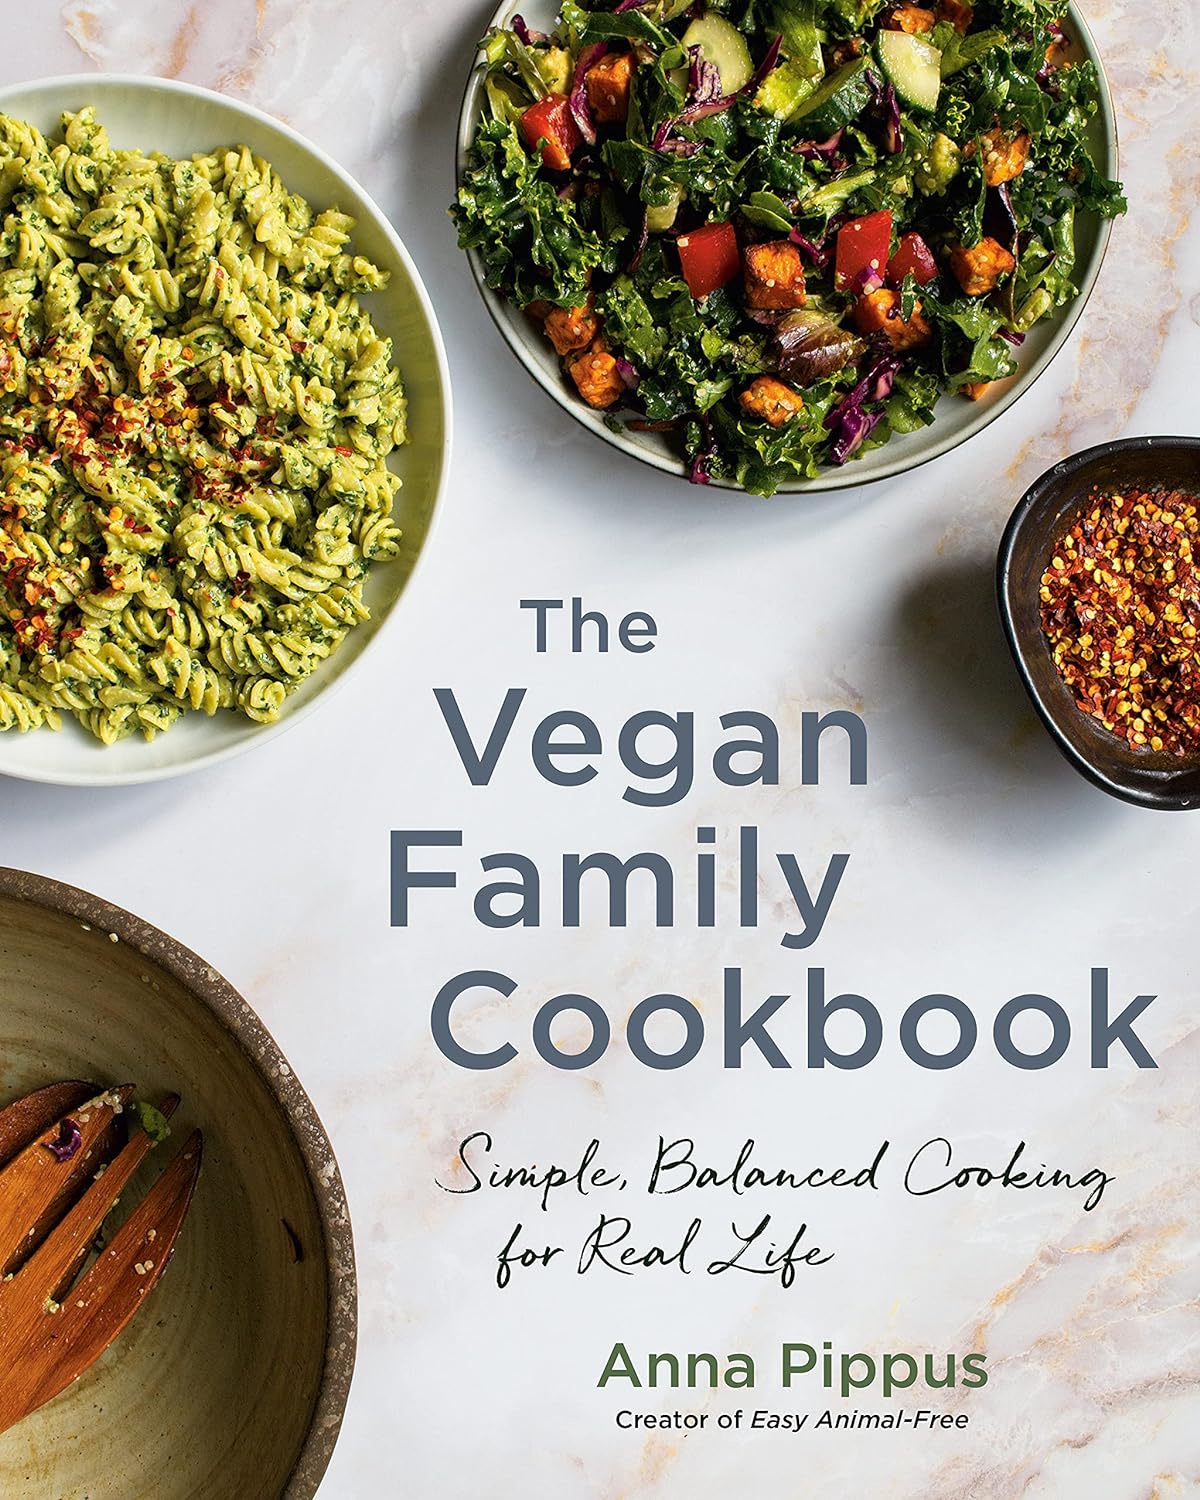 The Vegan Family Cookbook: Simple, Balanced Cooking for Real Life